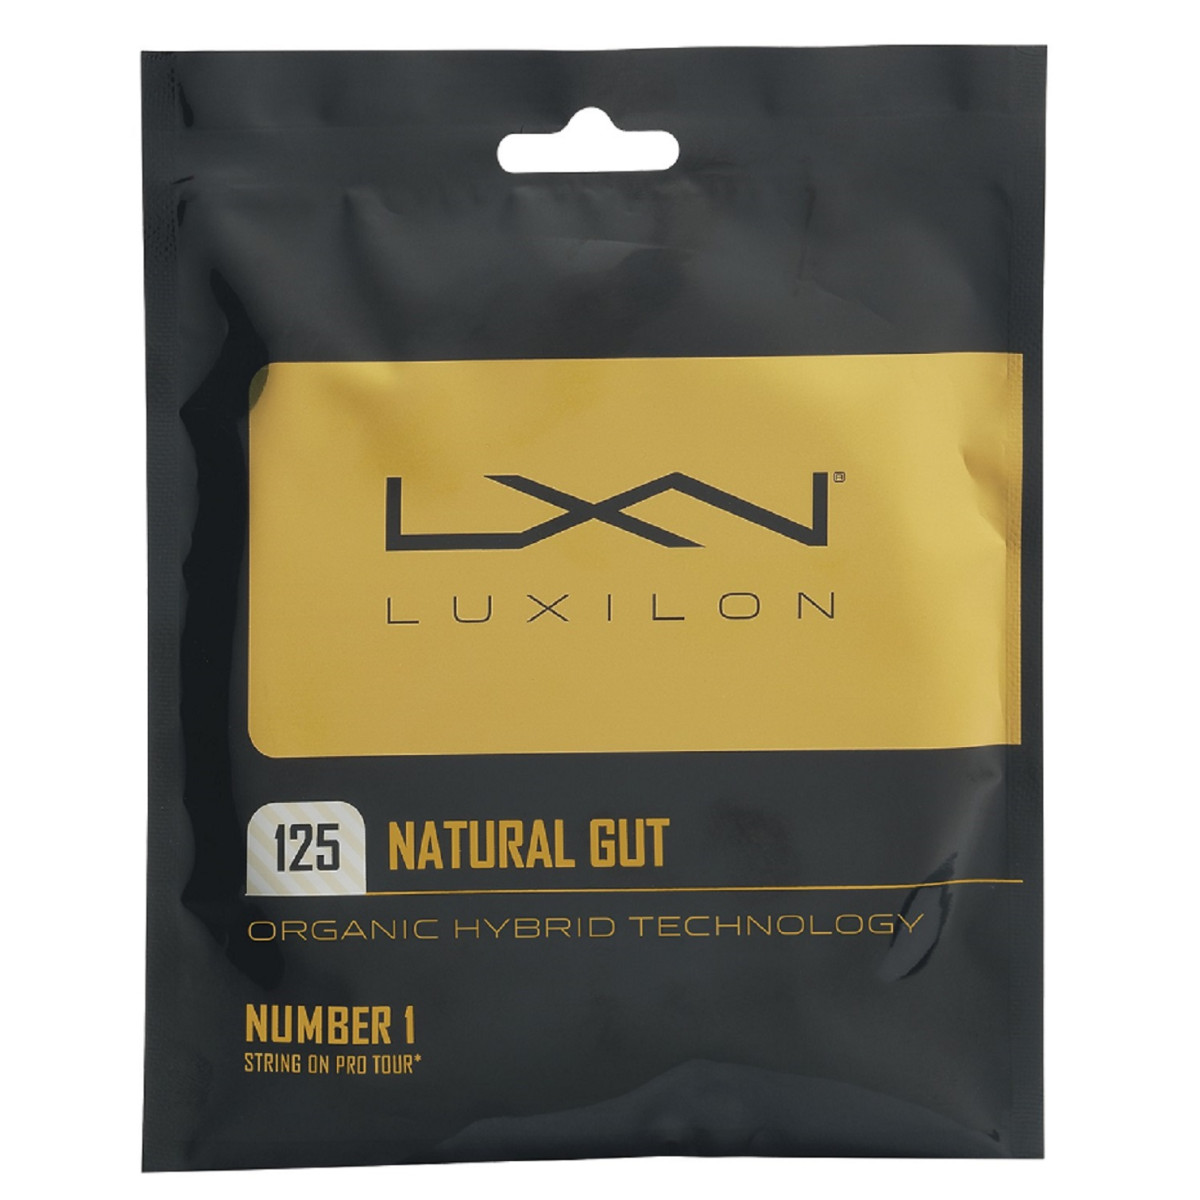 LUXILON NATURAL GUT (12 METERS) STRING PACK